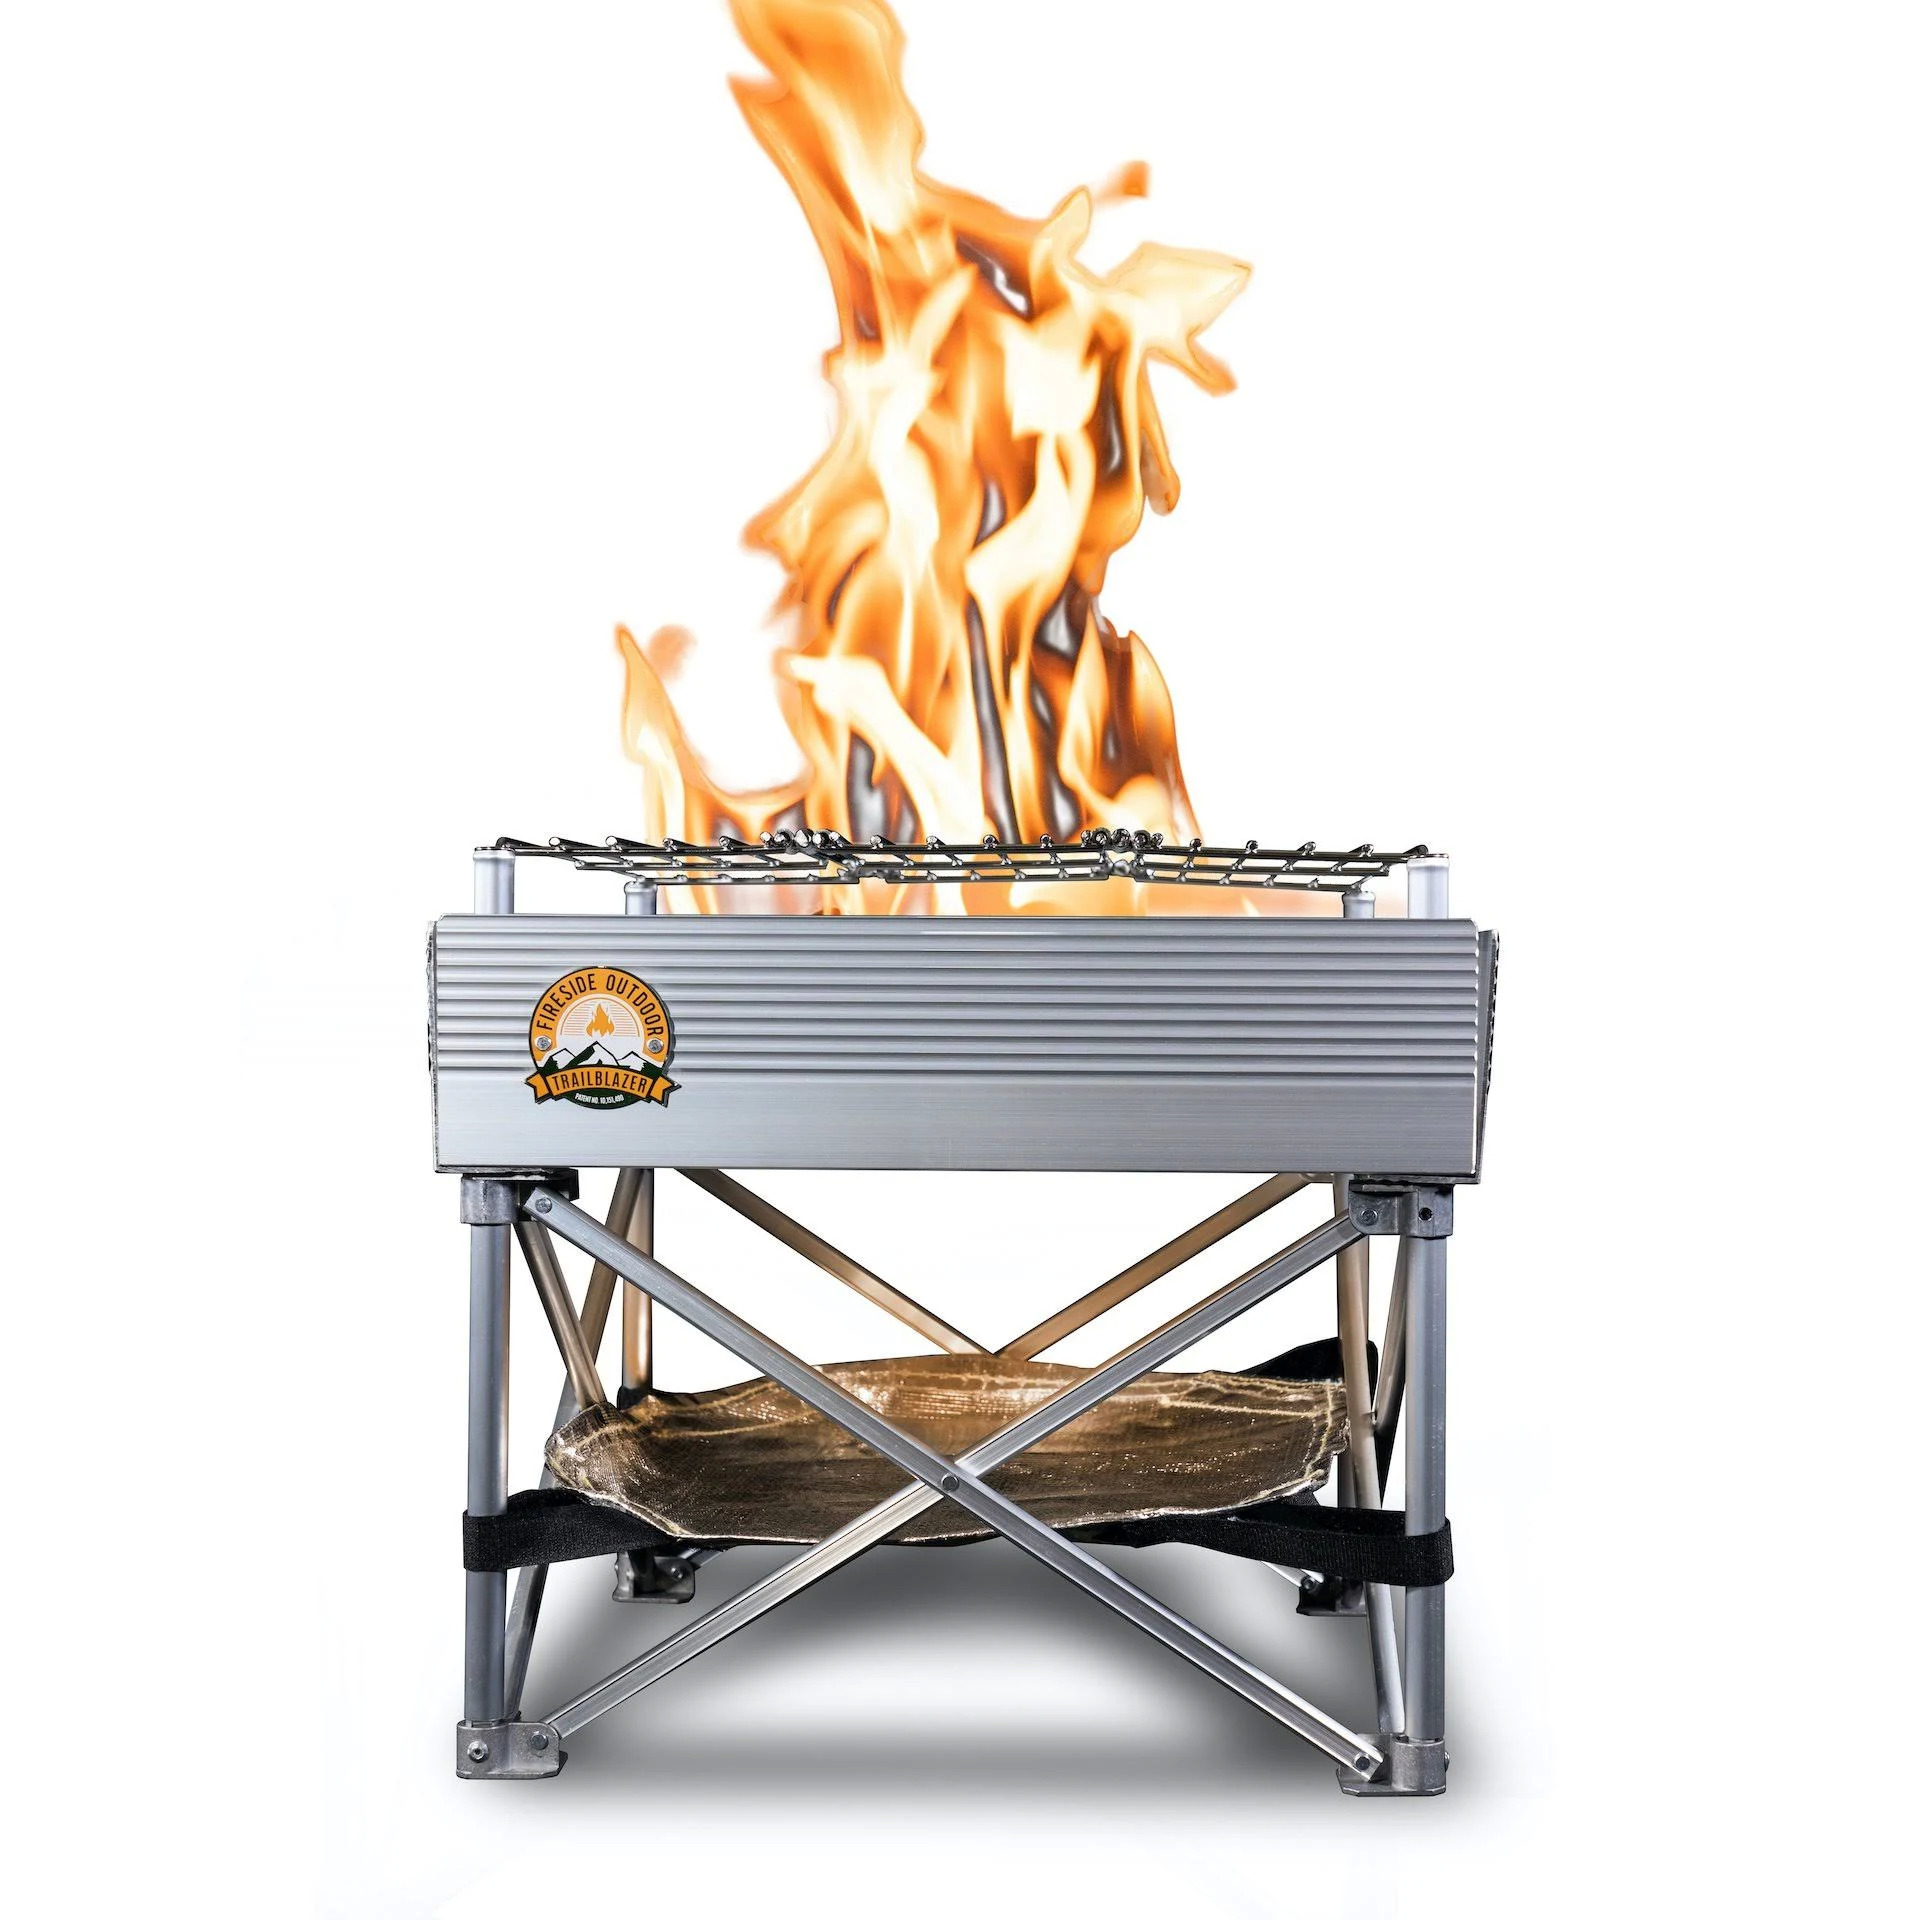 FIRESIDE OUTDOOR Trailblazer Fire Pit and Grill from REI for $24.93 with free shipping for member OR $50 minimum required for non-member